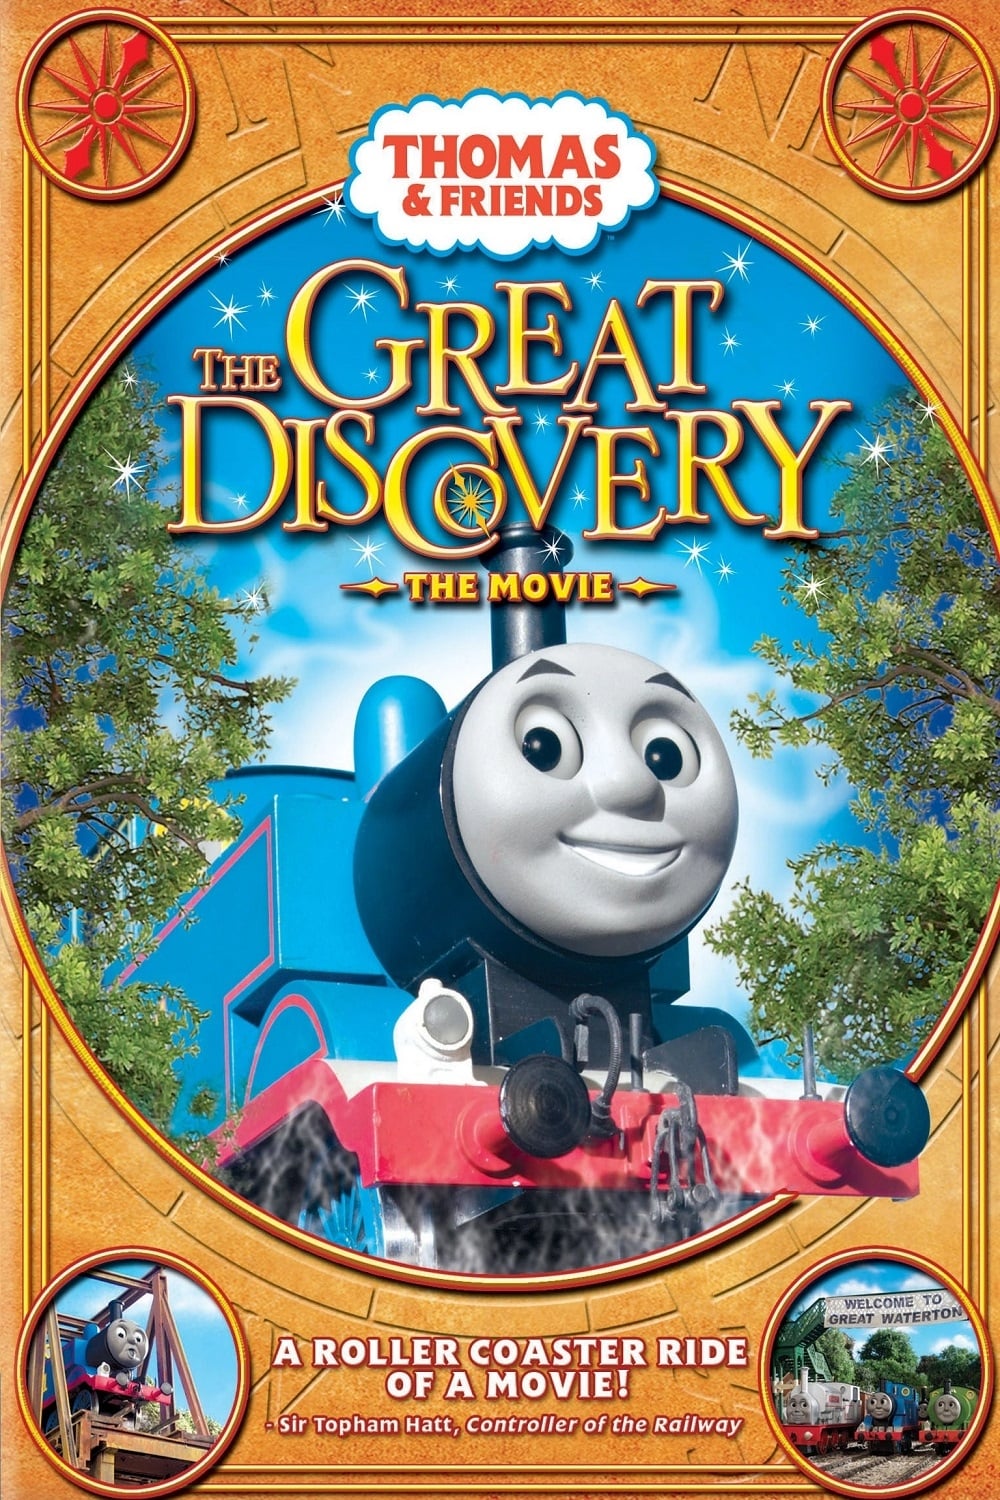 Thomas & Friends: The Great Discovery: The Movie